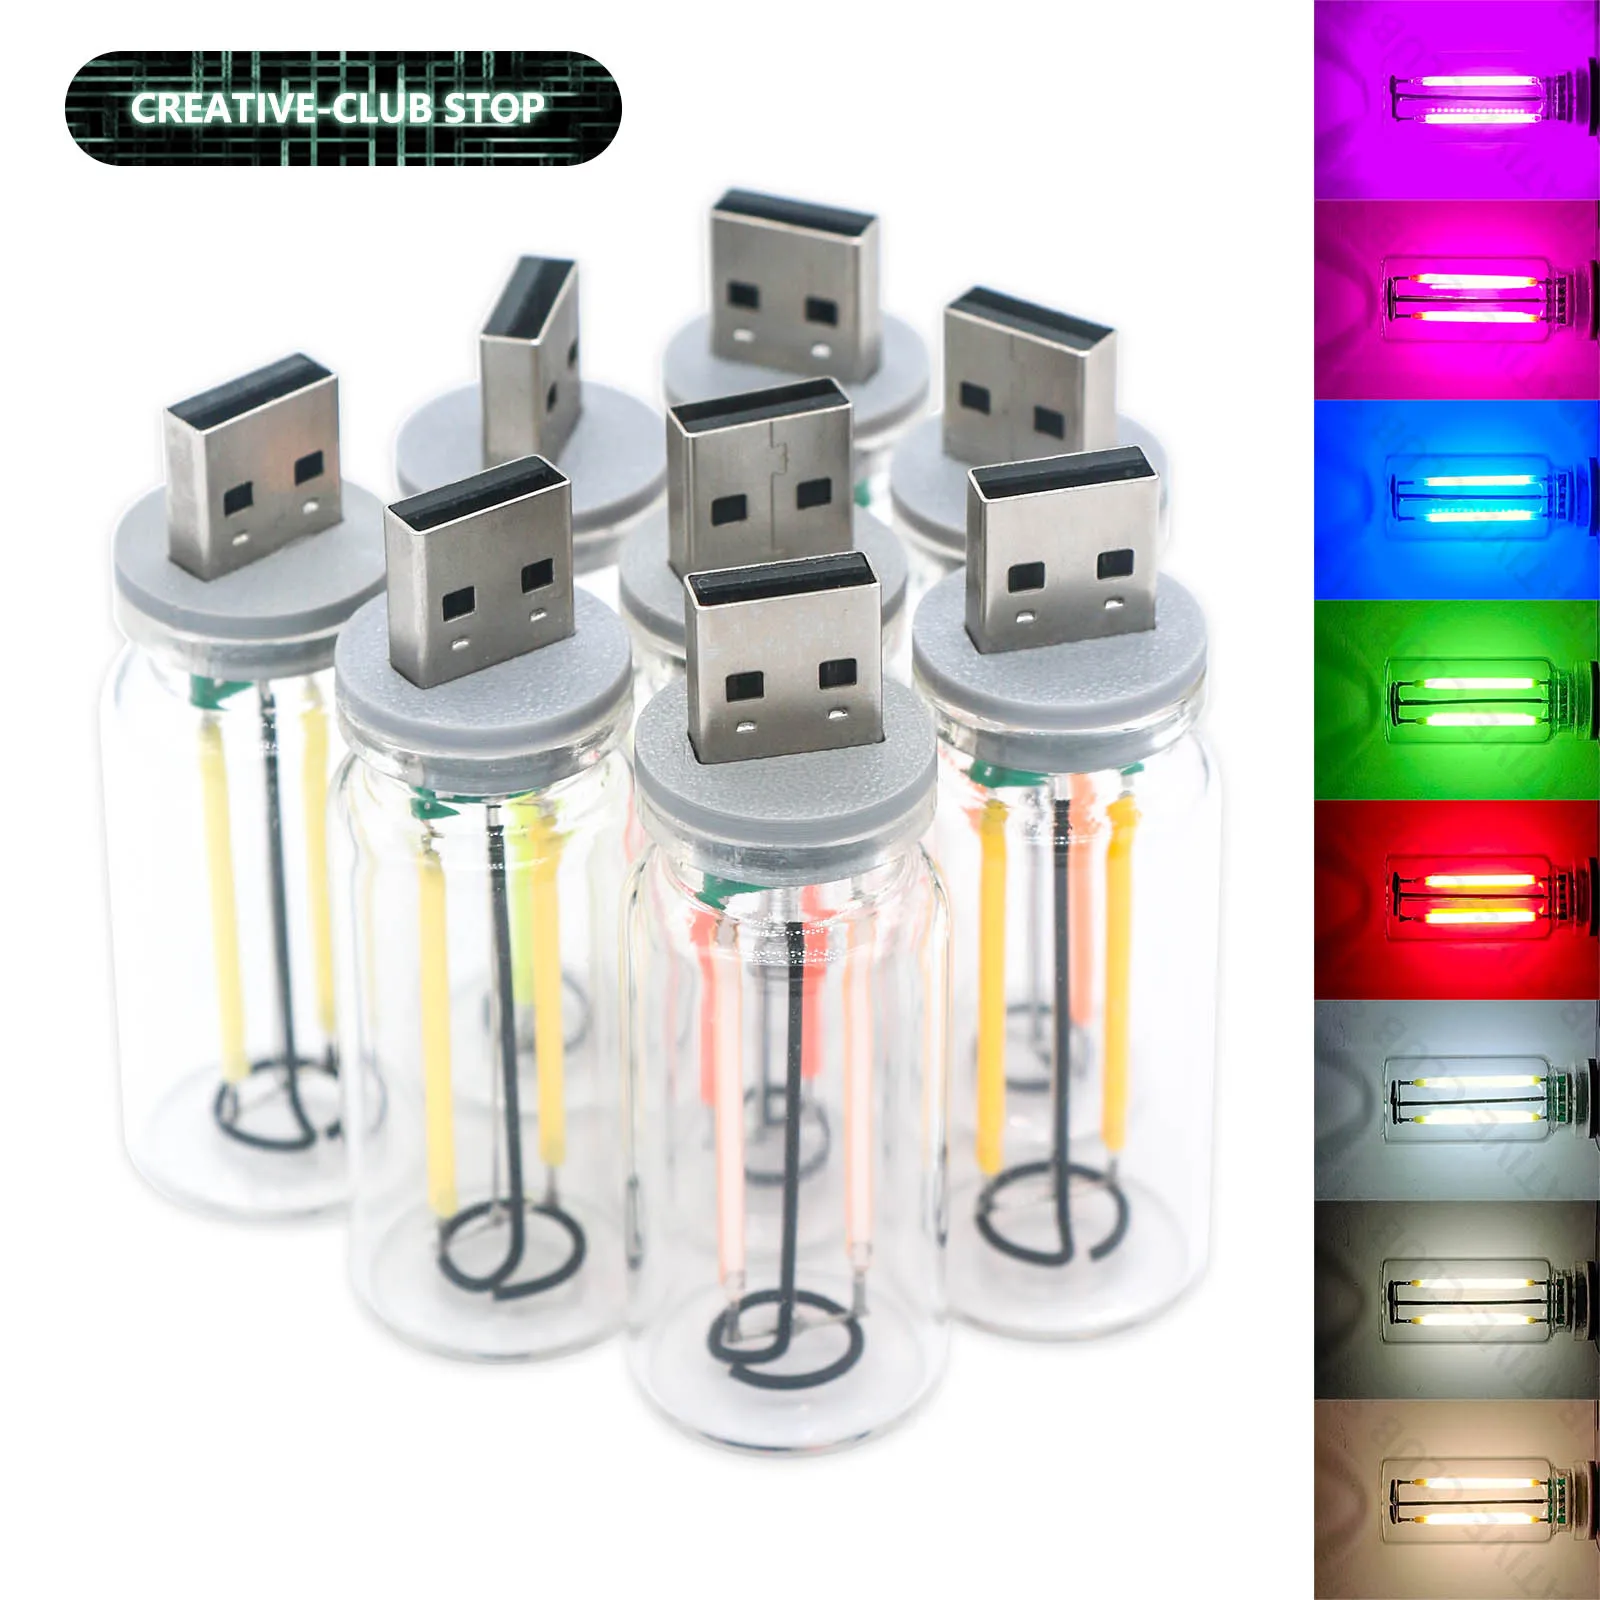 

4pcs Mini USB Touch Dimmable Night Light Portable LED Lamp Bulb for Bedroom Atmosphere Lights Decorative Lamp Bedside Lighting